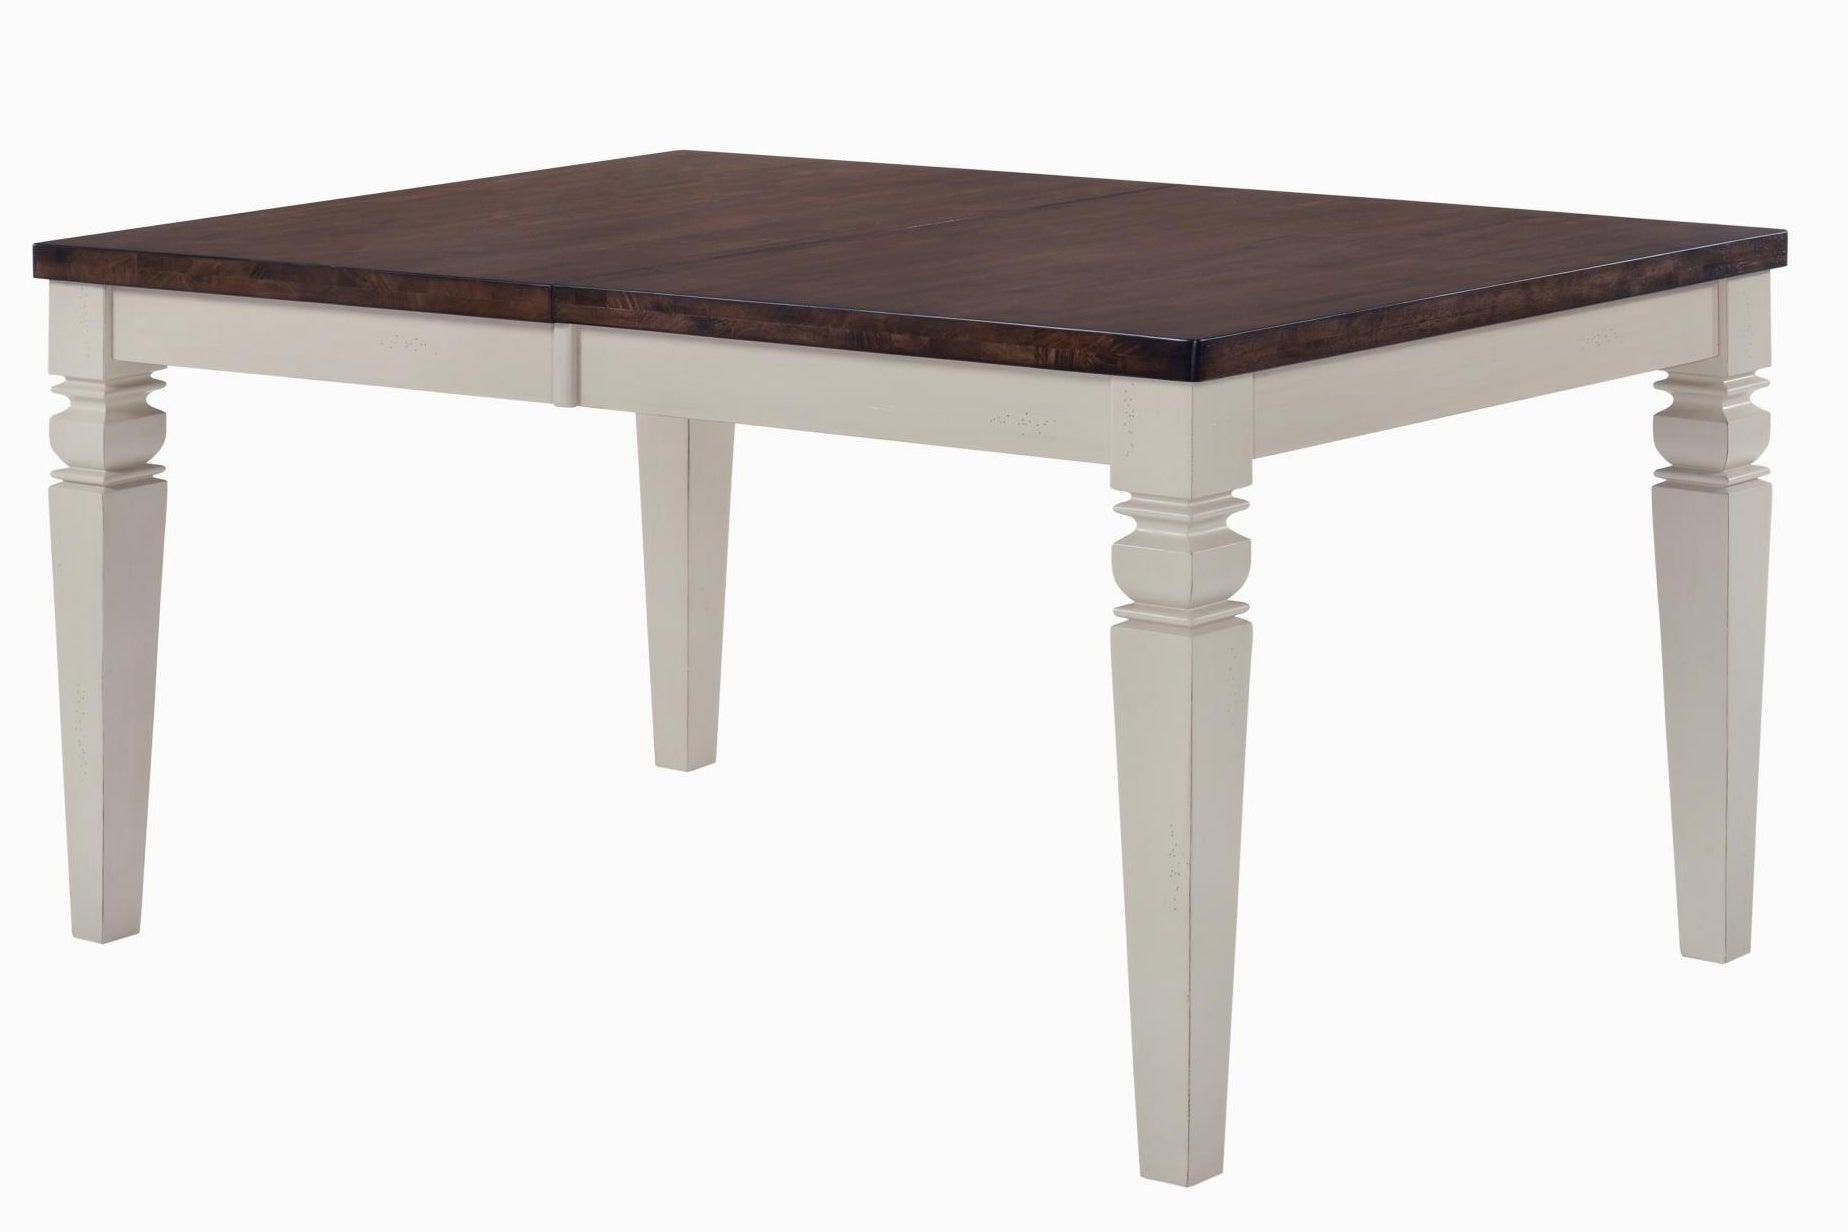 Rustic White and Brown Two Tone Hardwood Dining Table - AFS